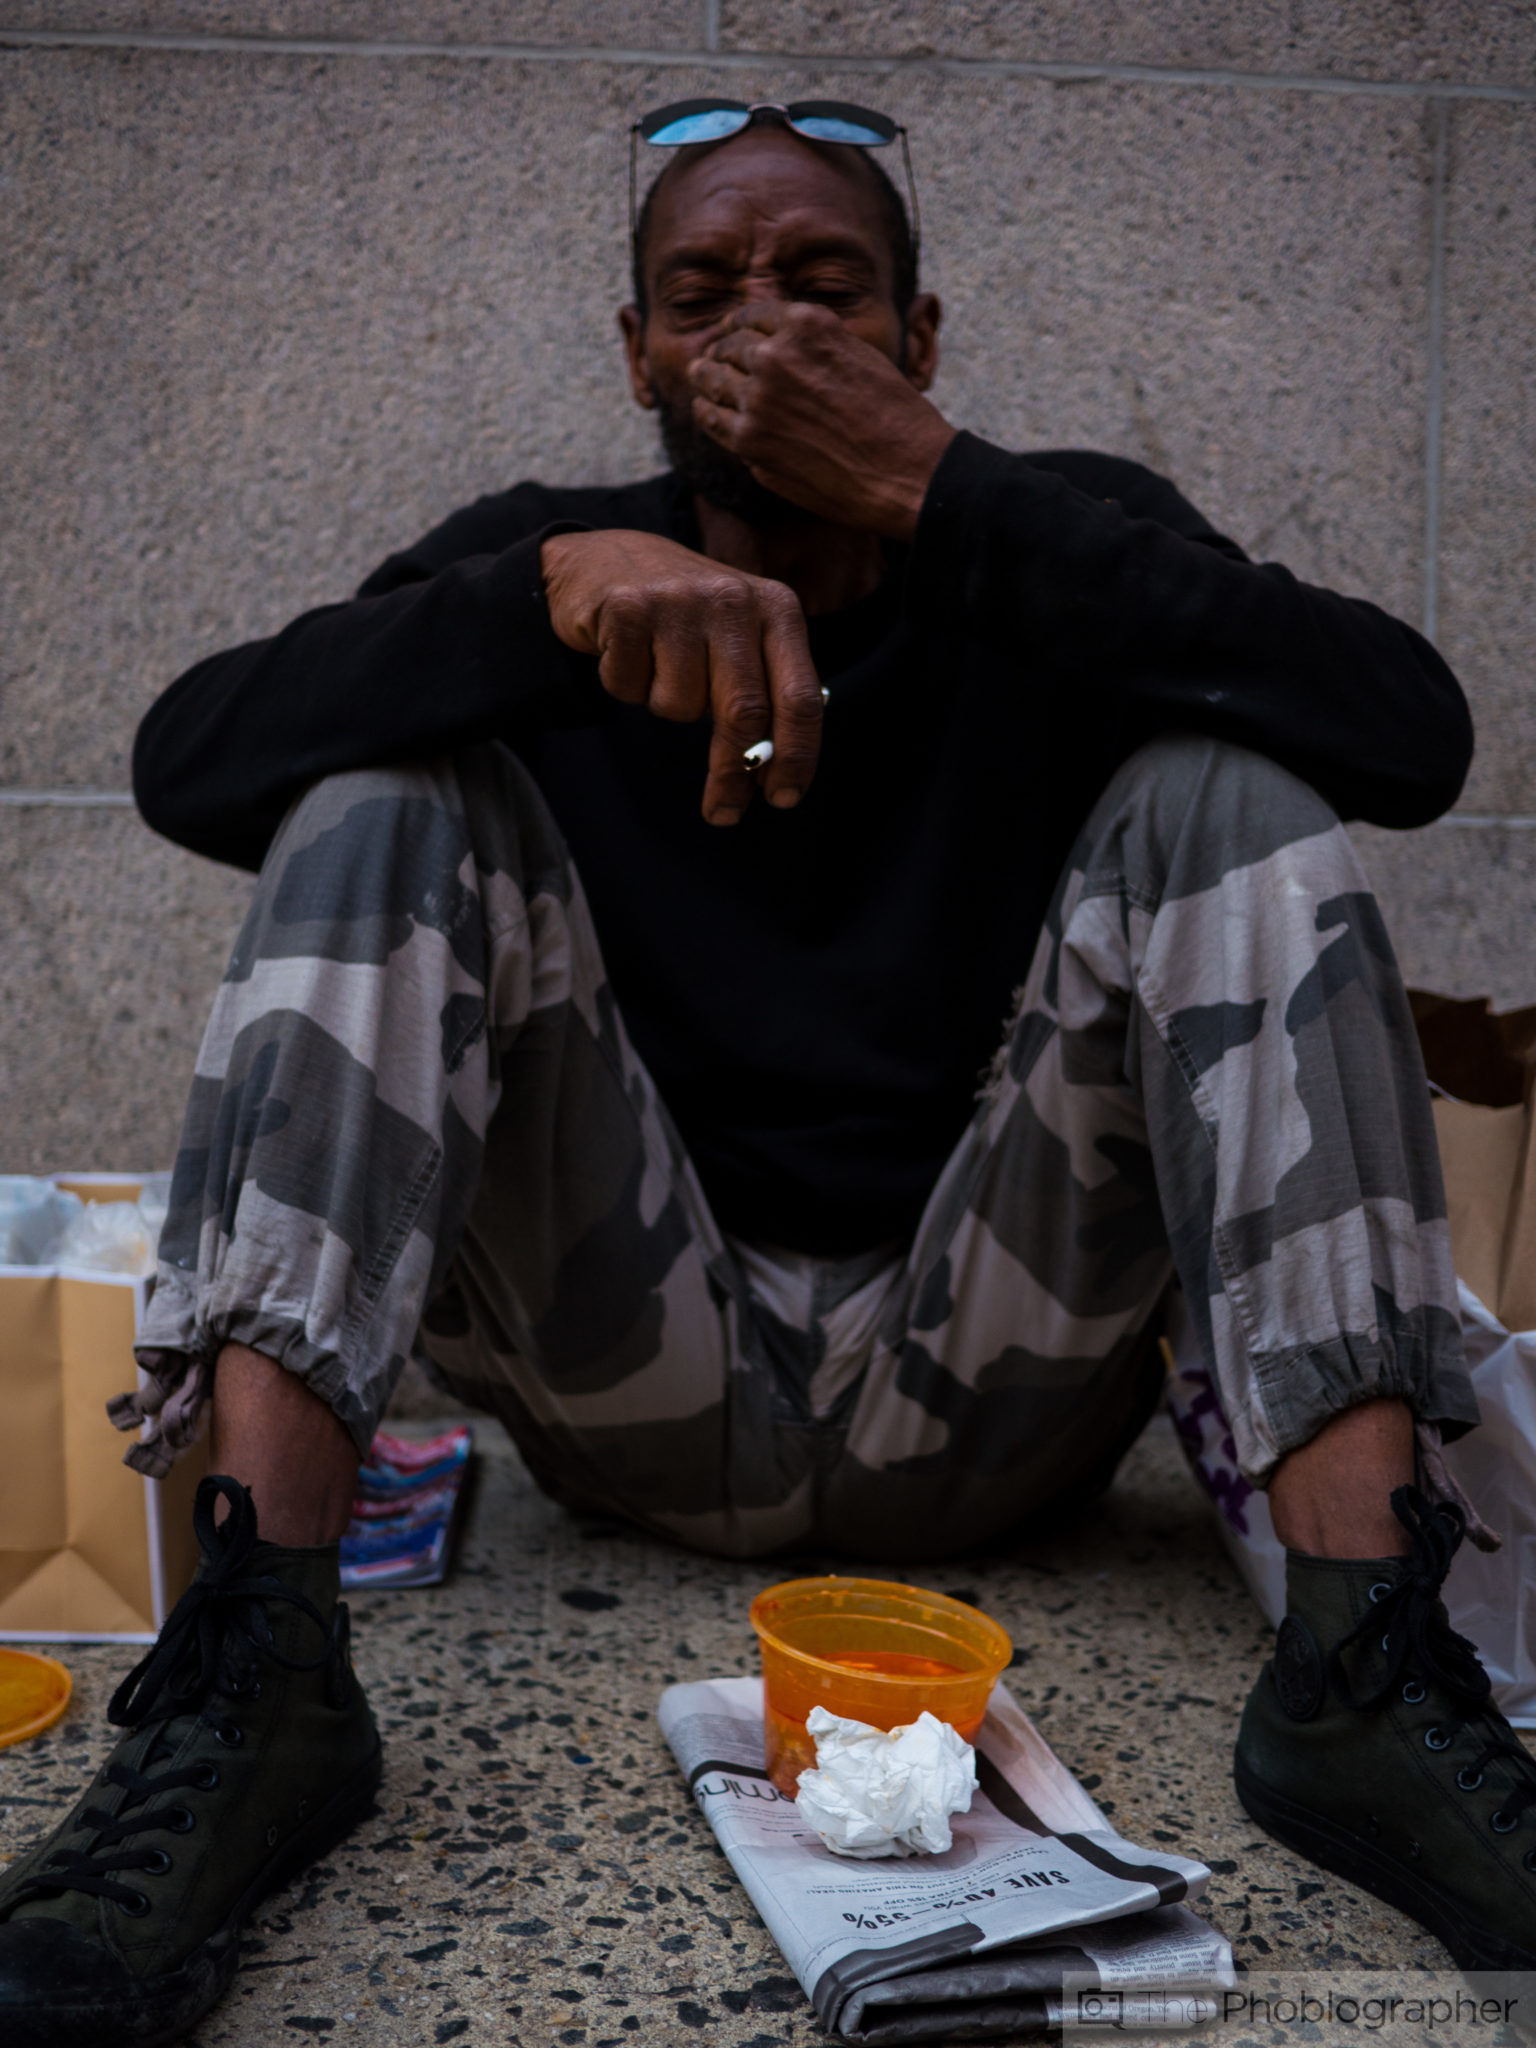 The Phoblographer Answers: Should You Photograph Homeless People?